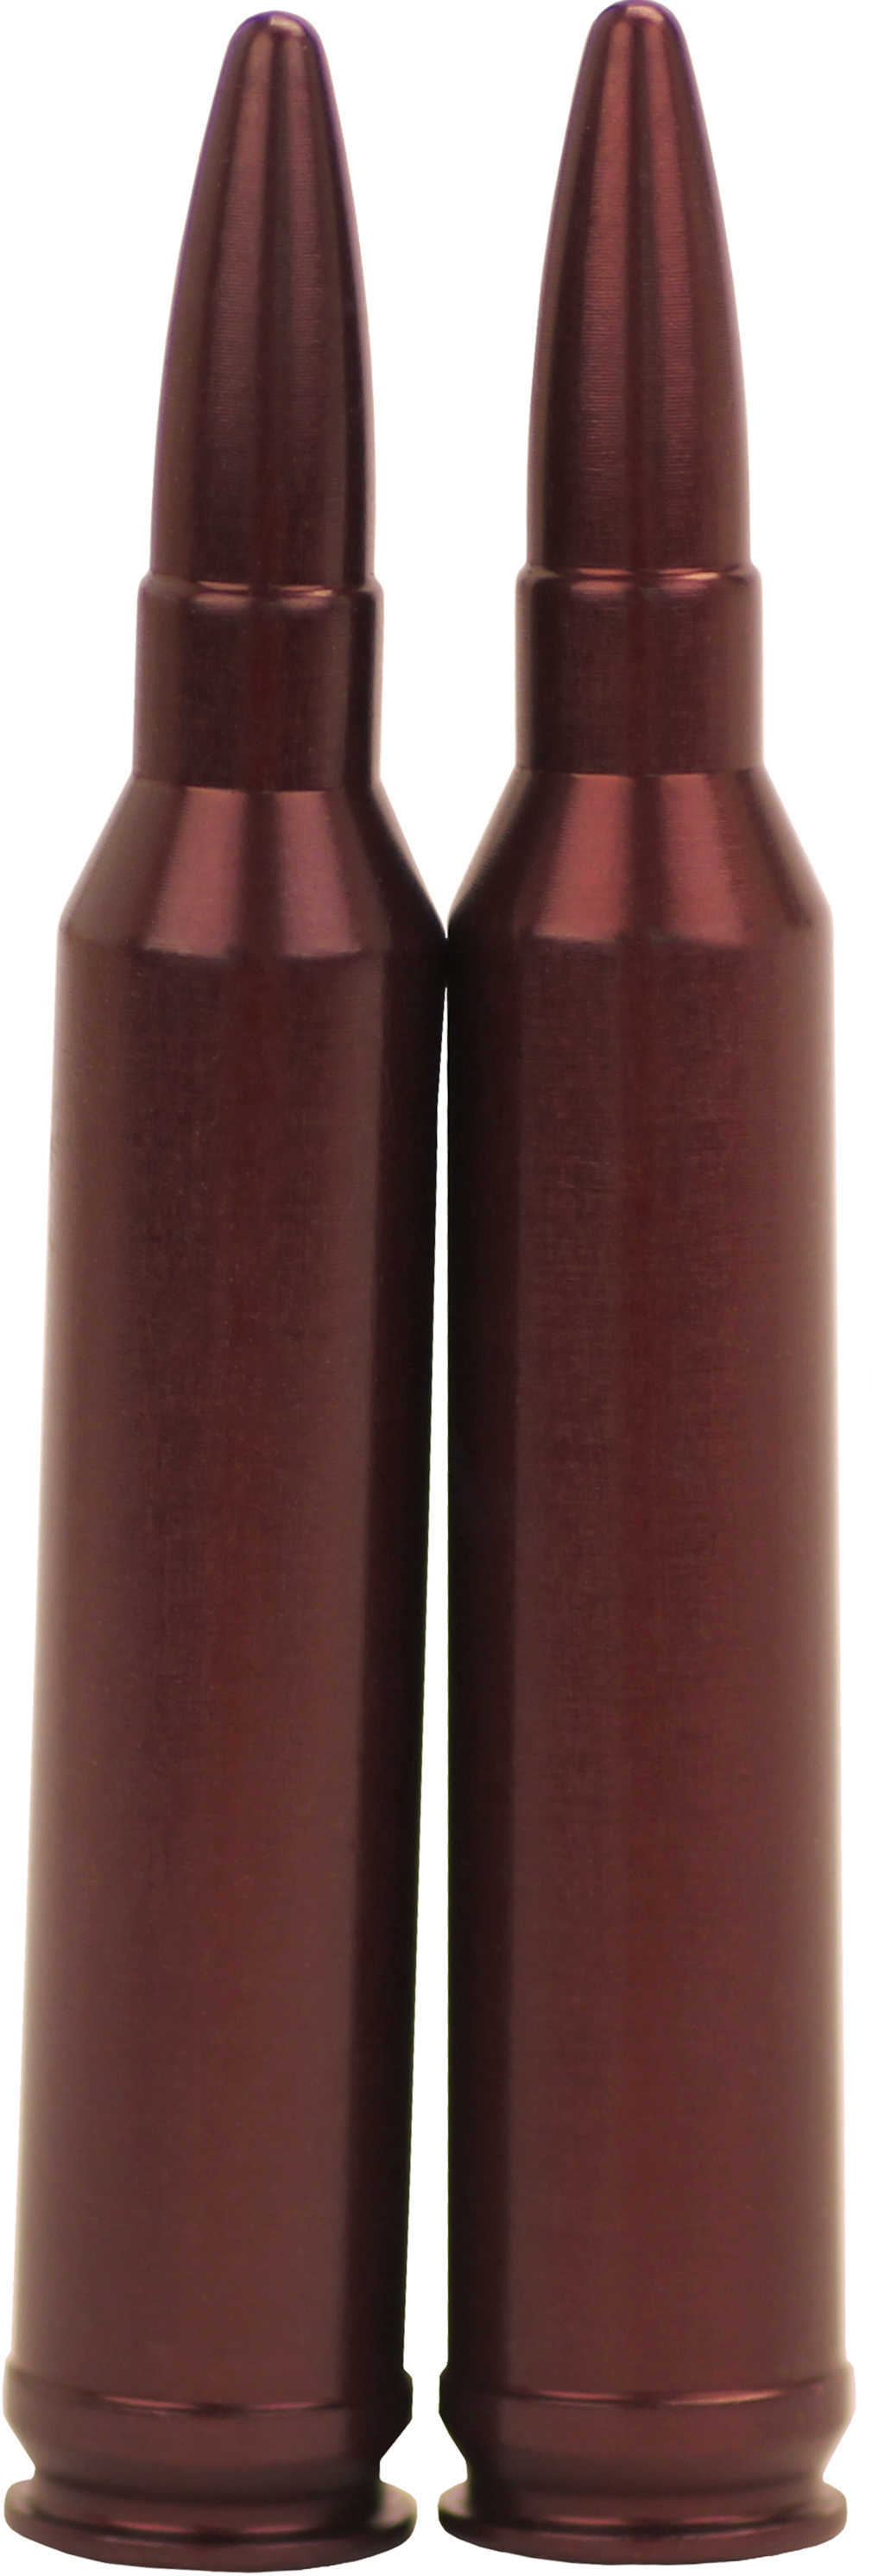 A-Zoom Precision Metal Snap Caps 7mm Rem Mag, 2 Per Pack For Safety Training, Function Testing Or safely decocking witho